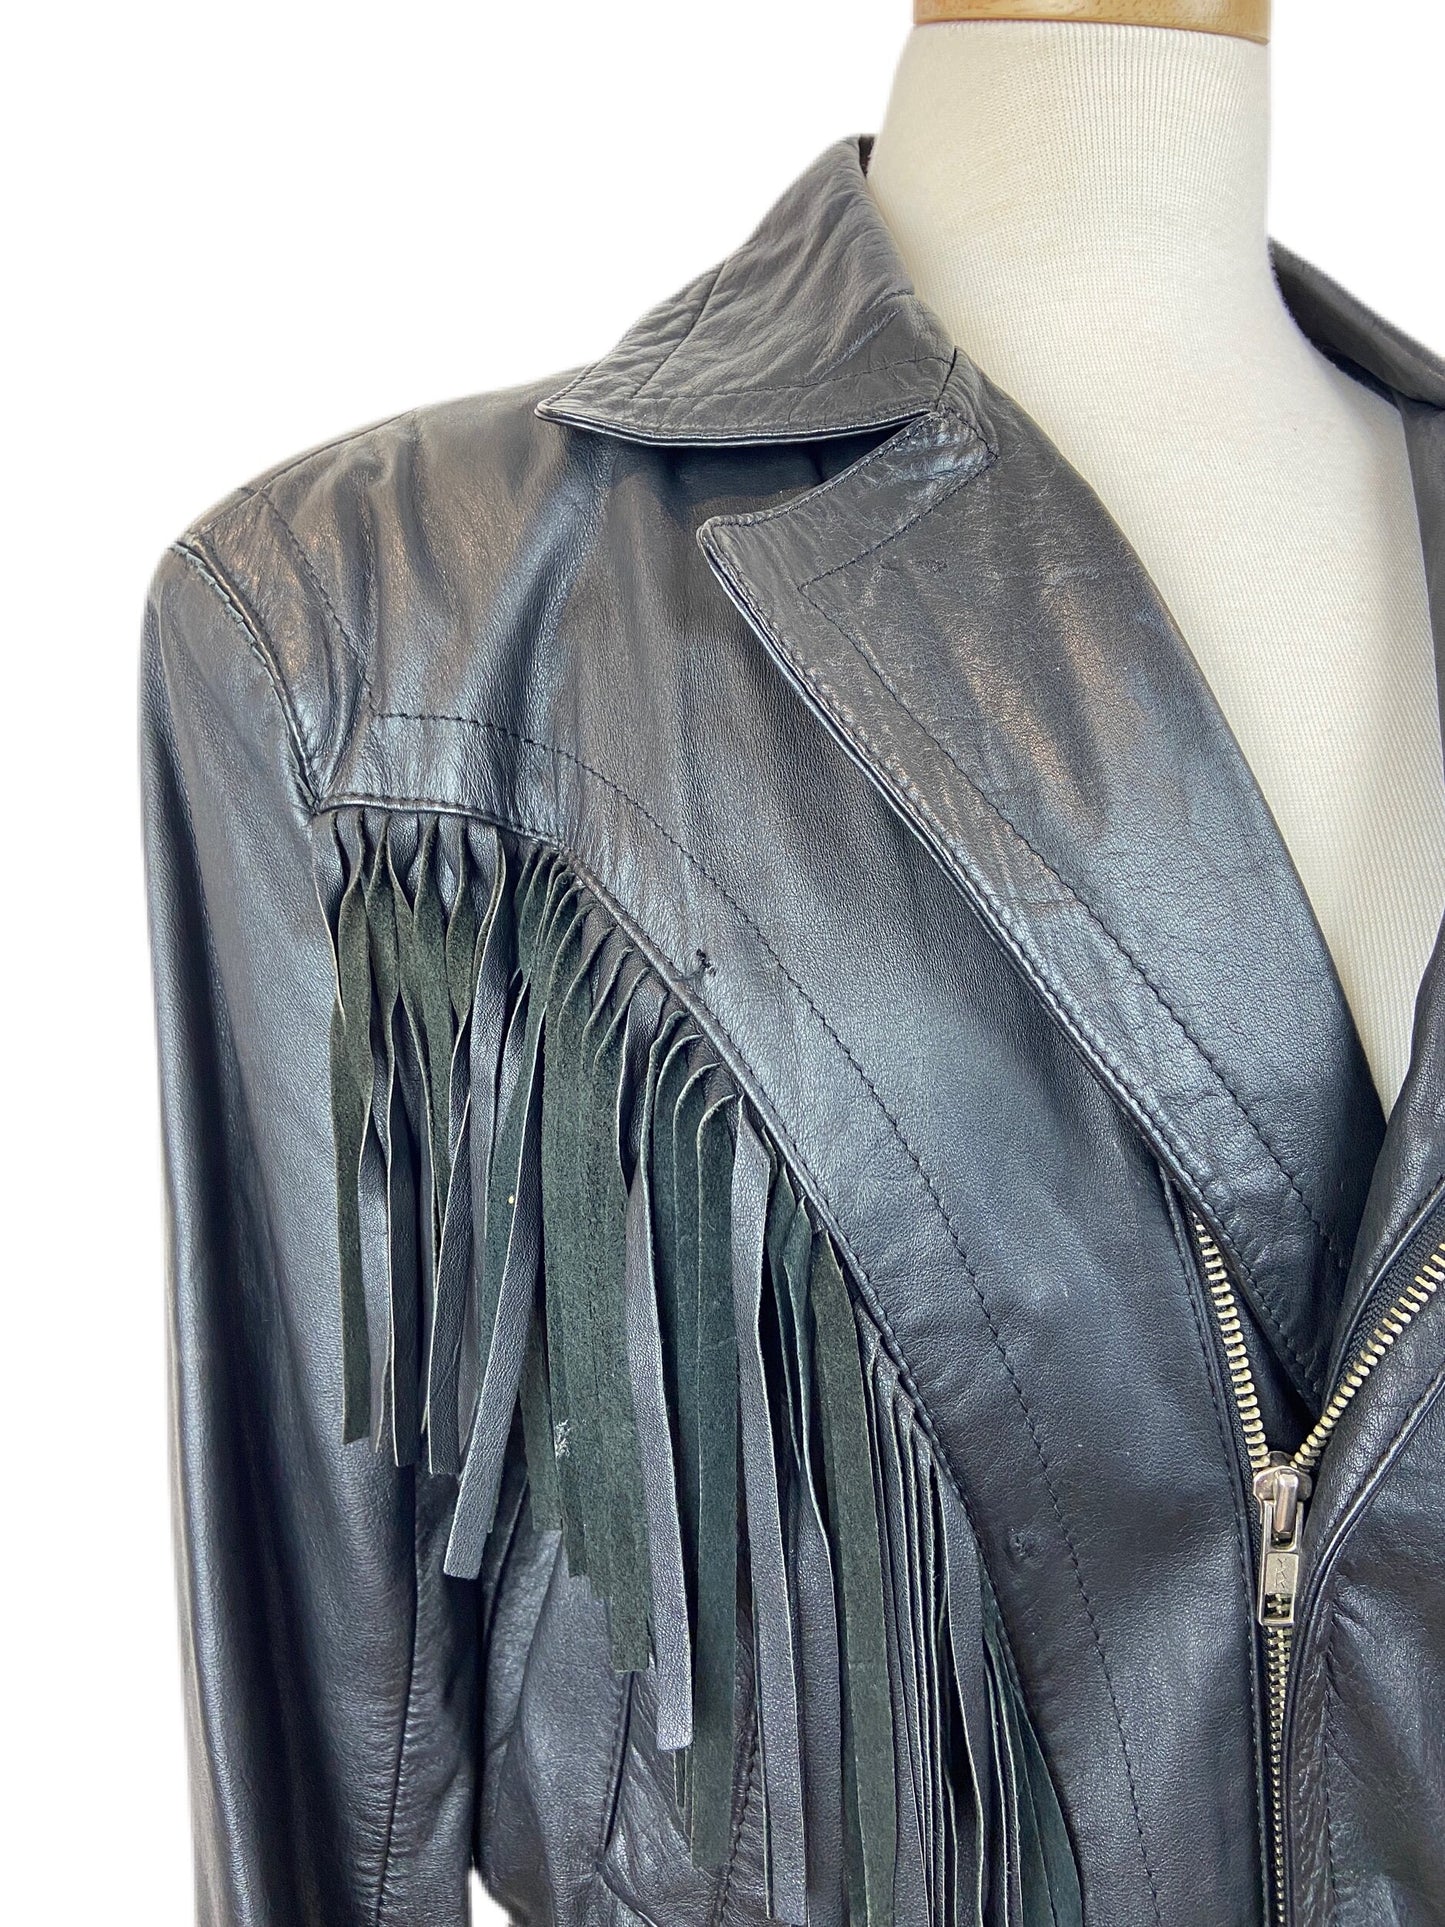 1980's Leather Fringe Jacket - Costume Piece from Feature Film "JT  Leroy" as Seen on Diane Krueger (M)